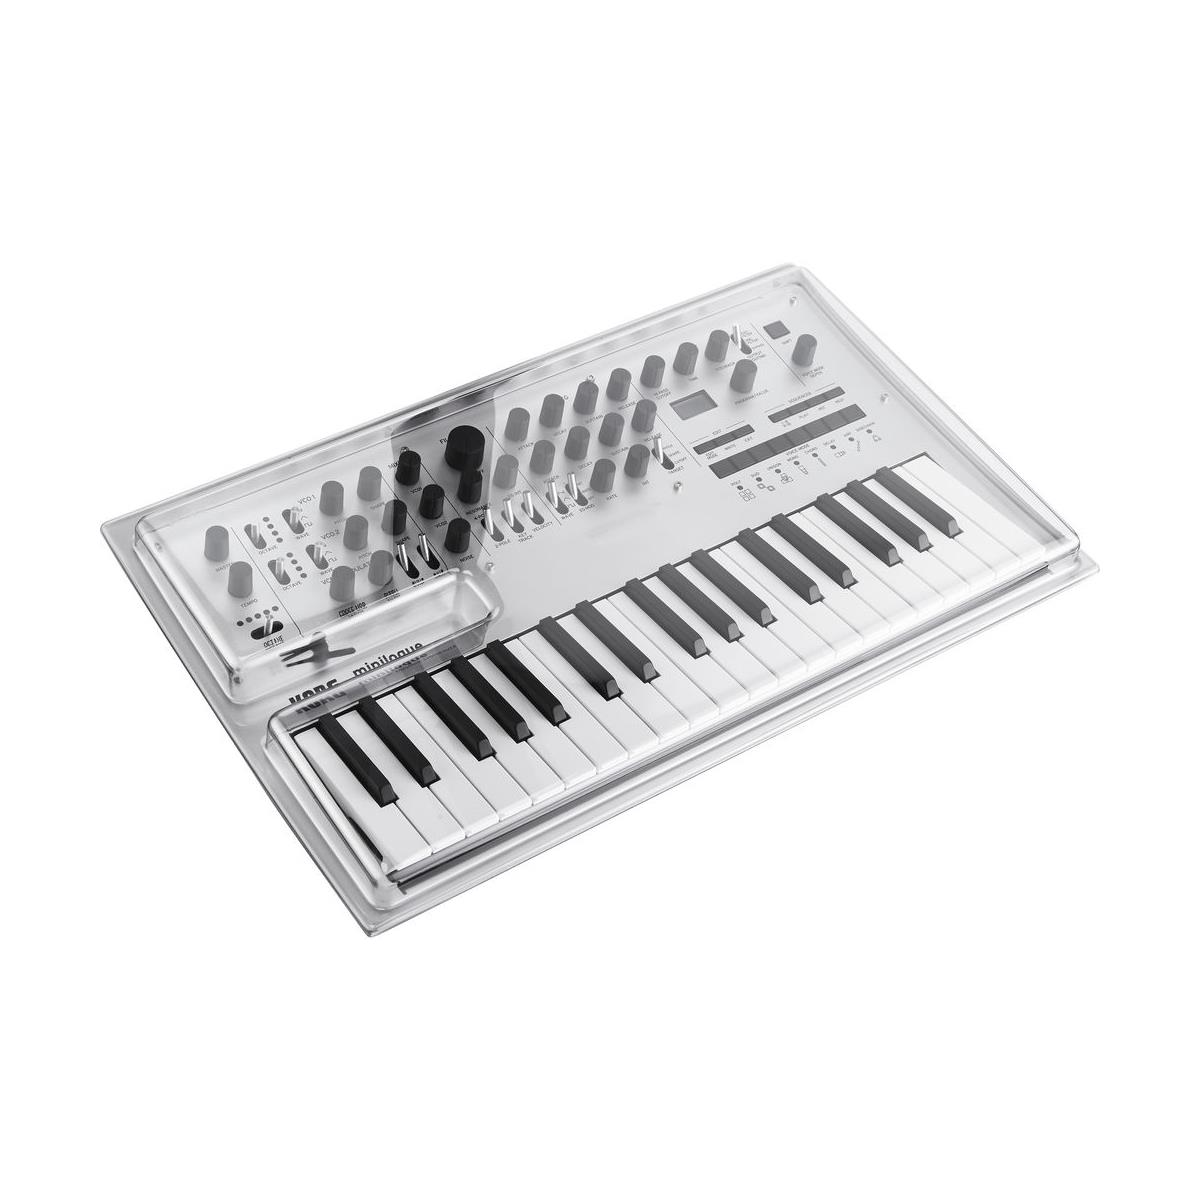 Image of Decksaver Cover for Korg Minilogue Synthesizer Keyboard